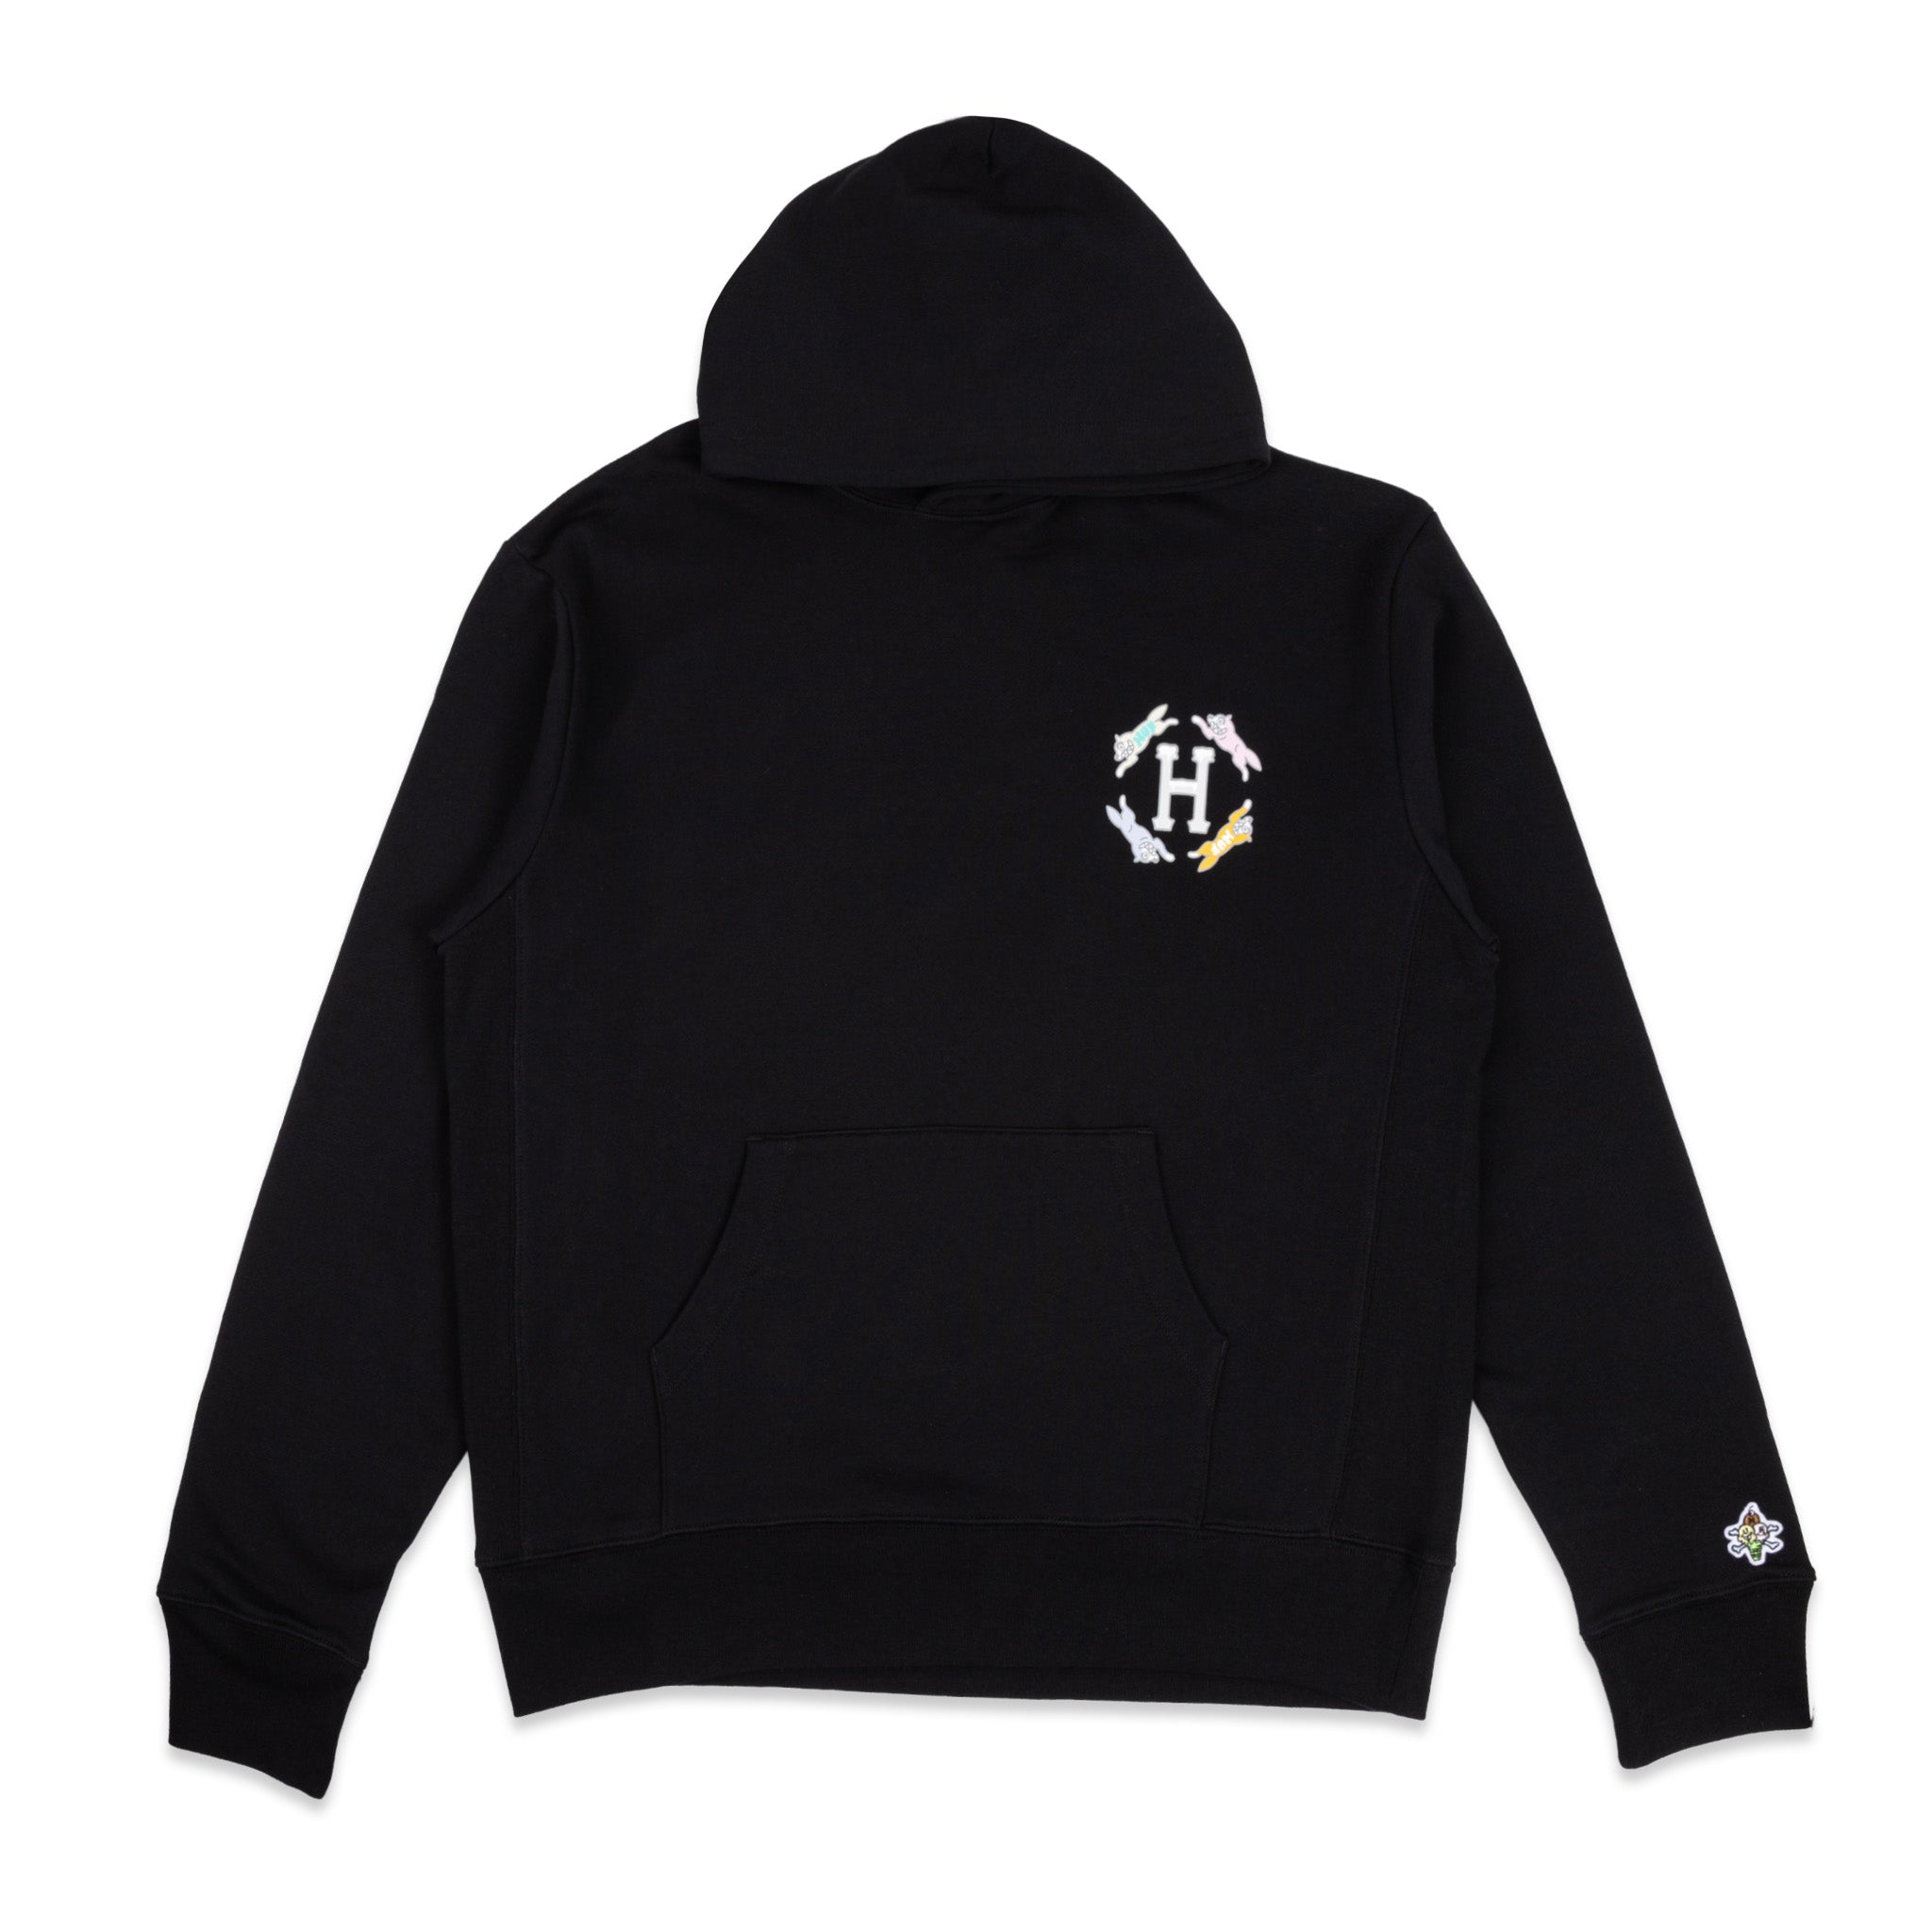 ICECREAM X HUF FROSTED HOODIE - BLACK